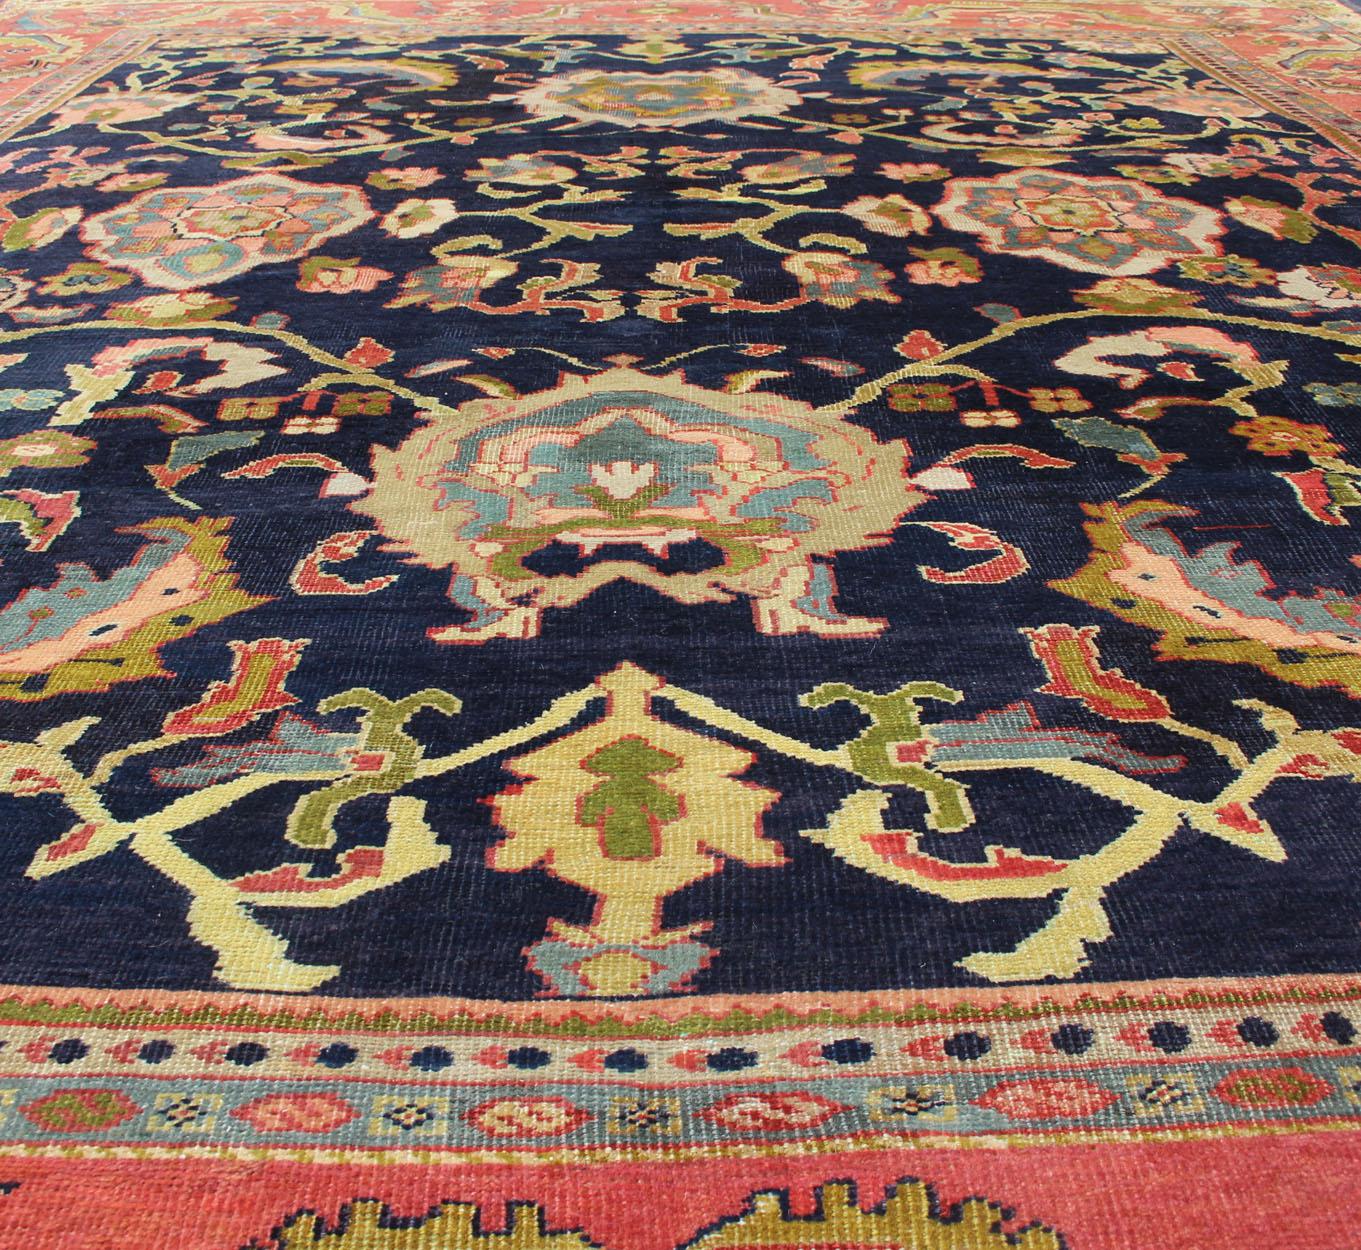  Antique Persian Sultanabad Carpet in Navy Blue Background and Rose Red Border  For Sale 6